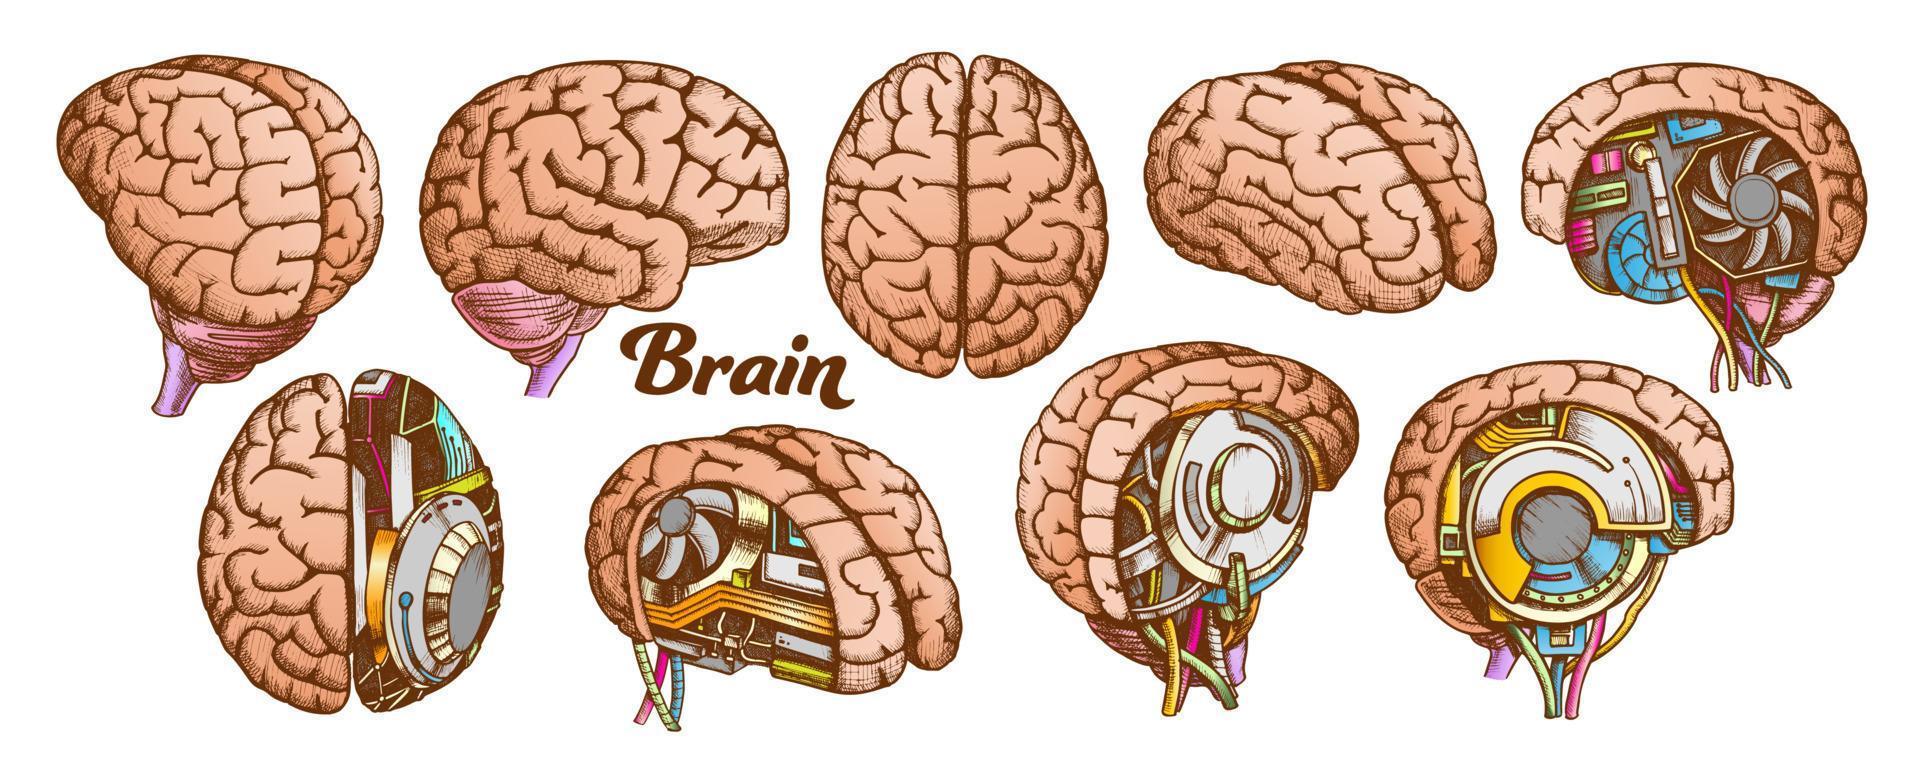 Color Brain Set Collection In Different Views Vector